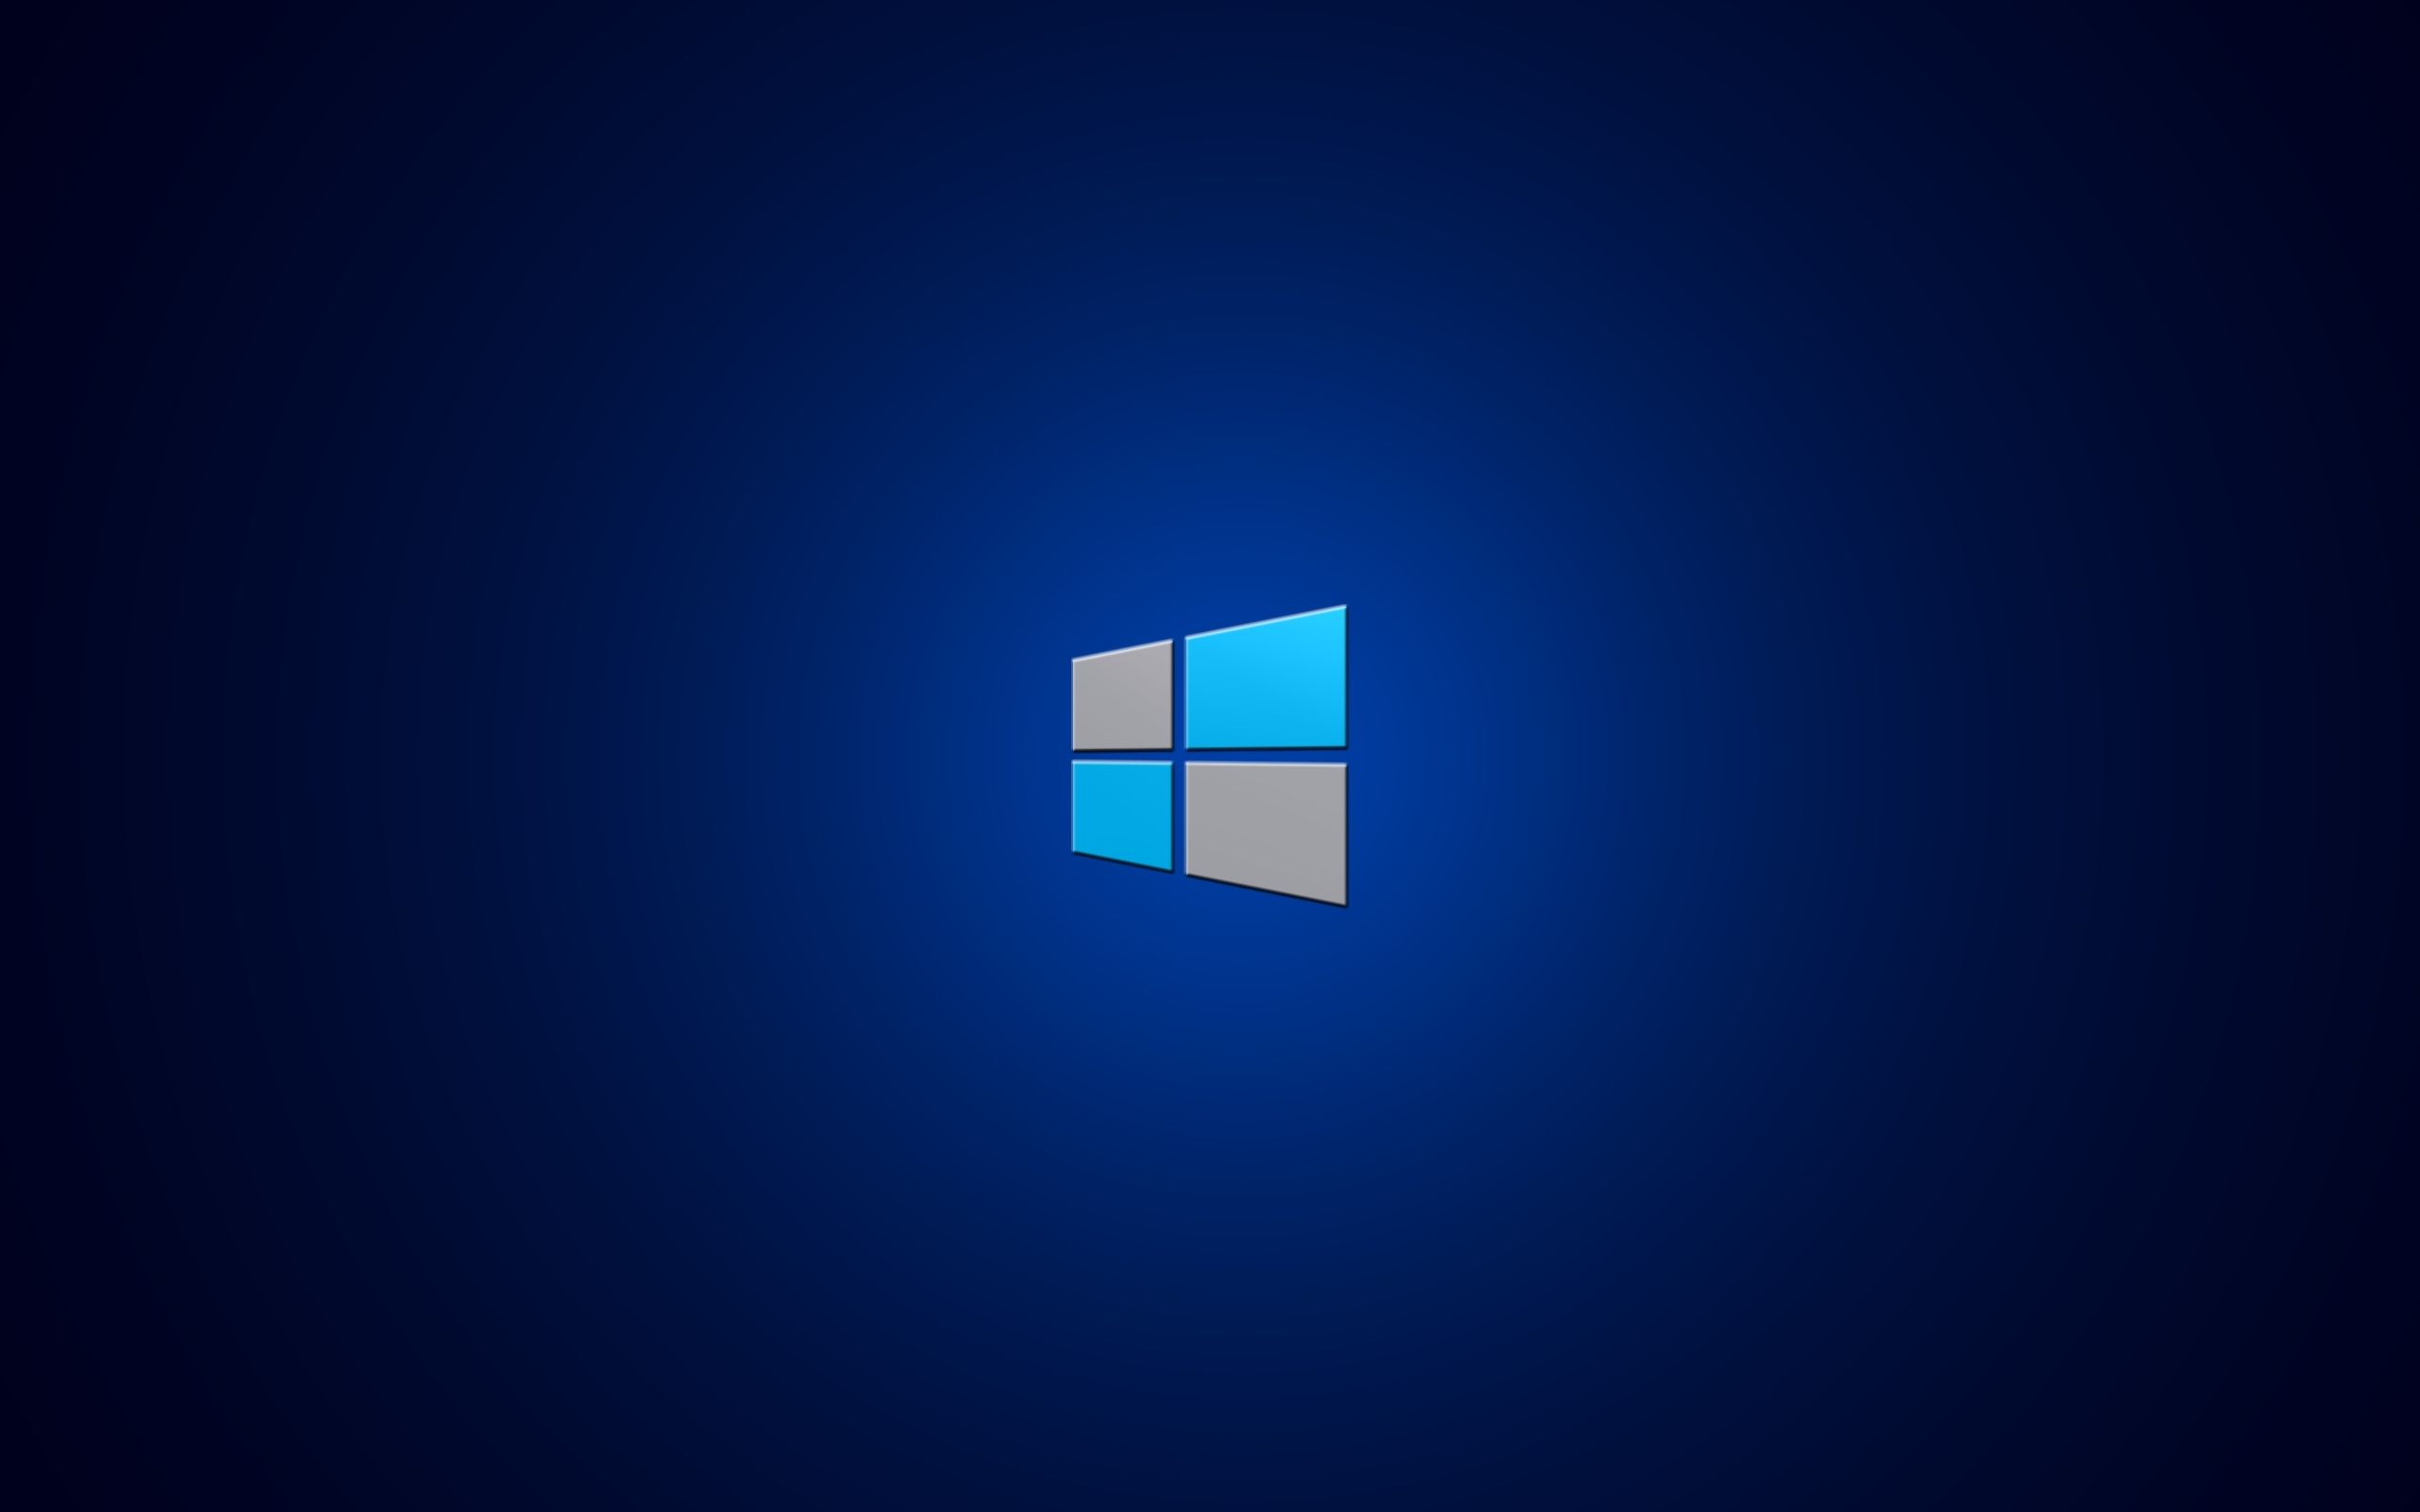 Windows 8 Default wallpaper | Awesome Wallpapers